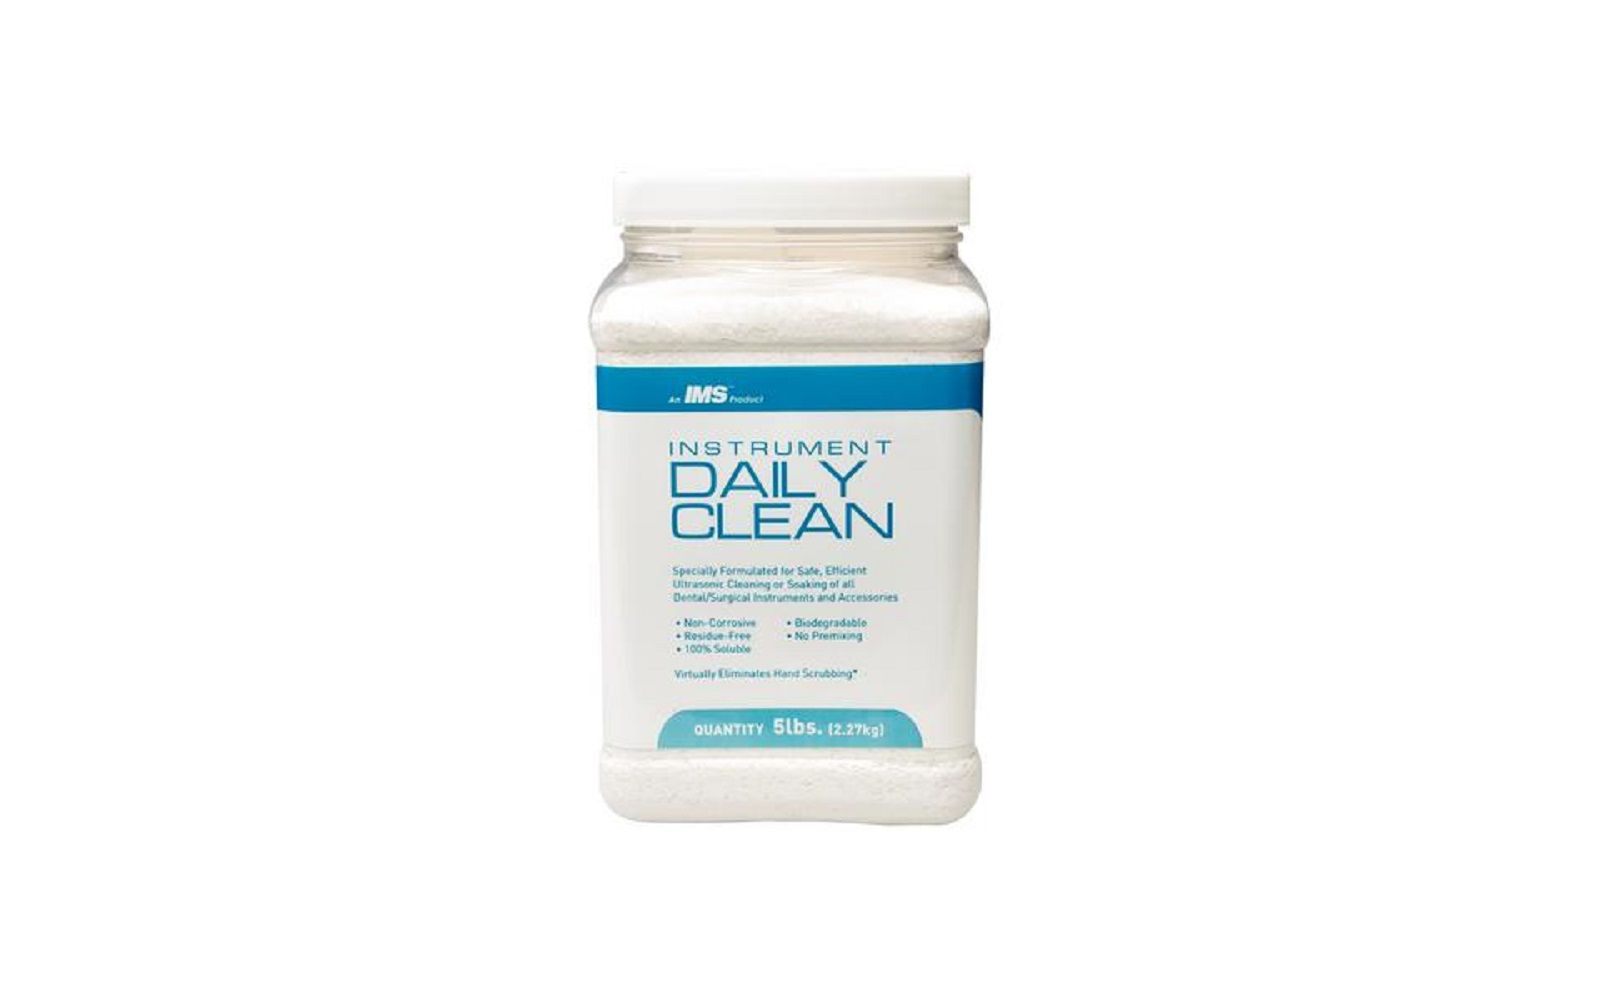 Ims® instrument daily clean - 5 lb